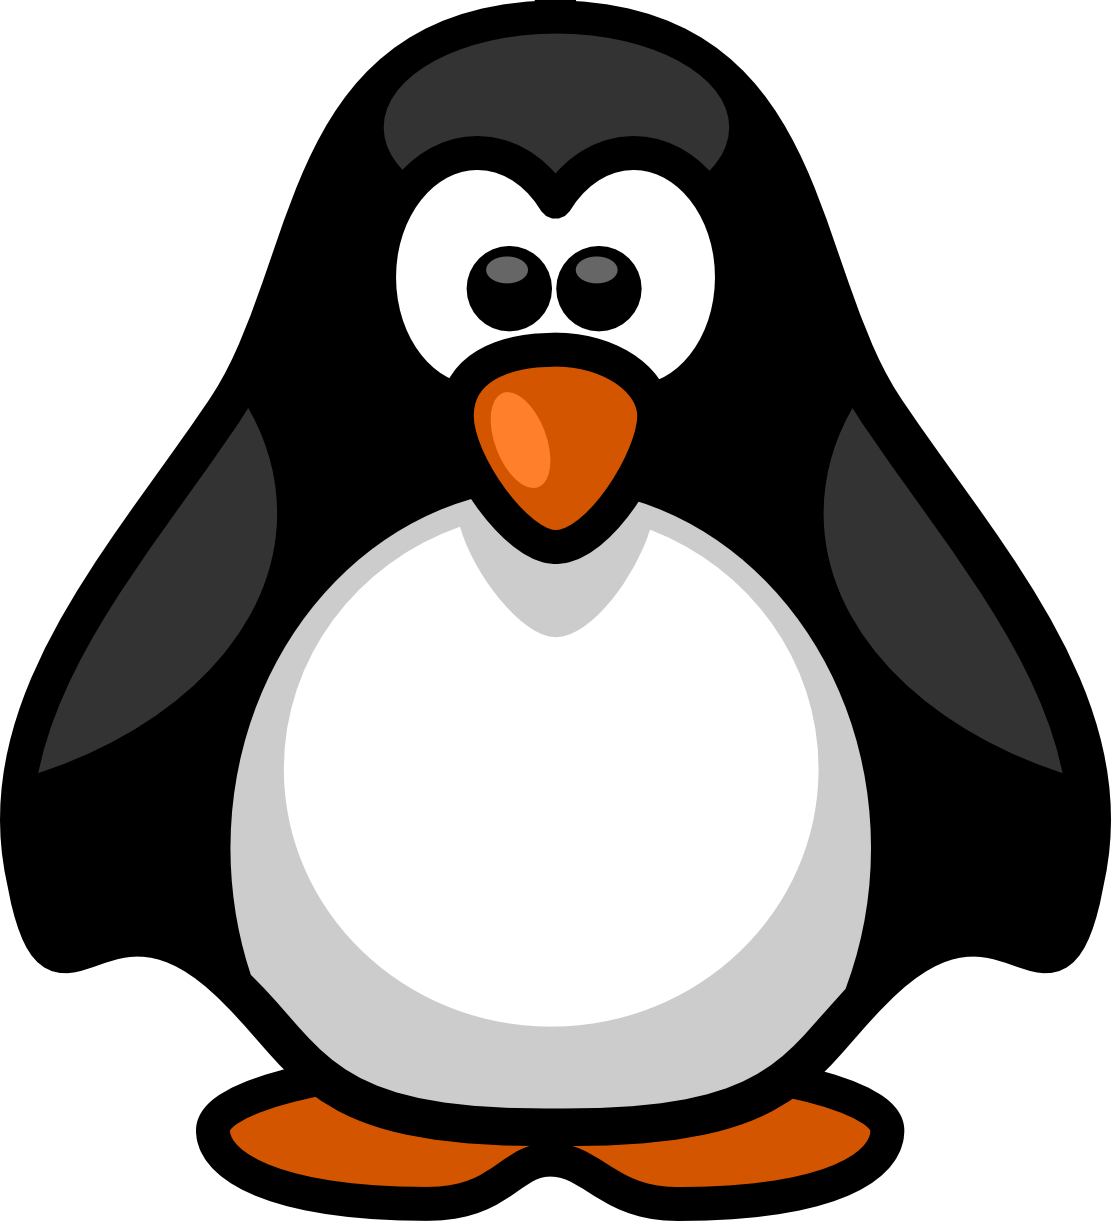 penguins clipart black and white